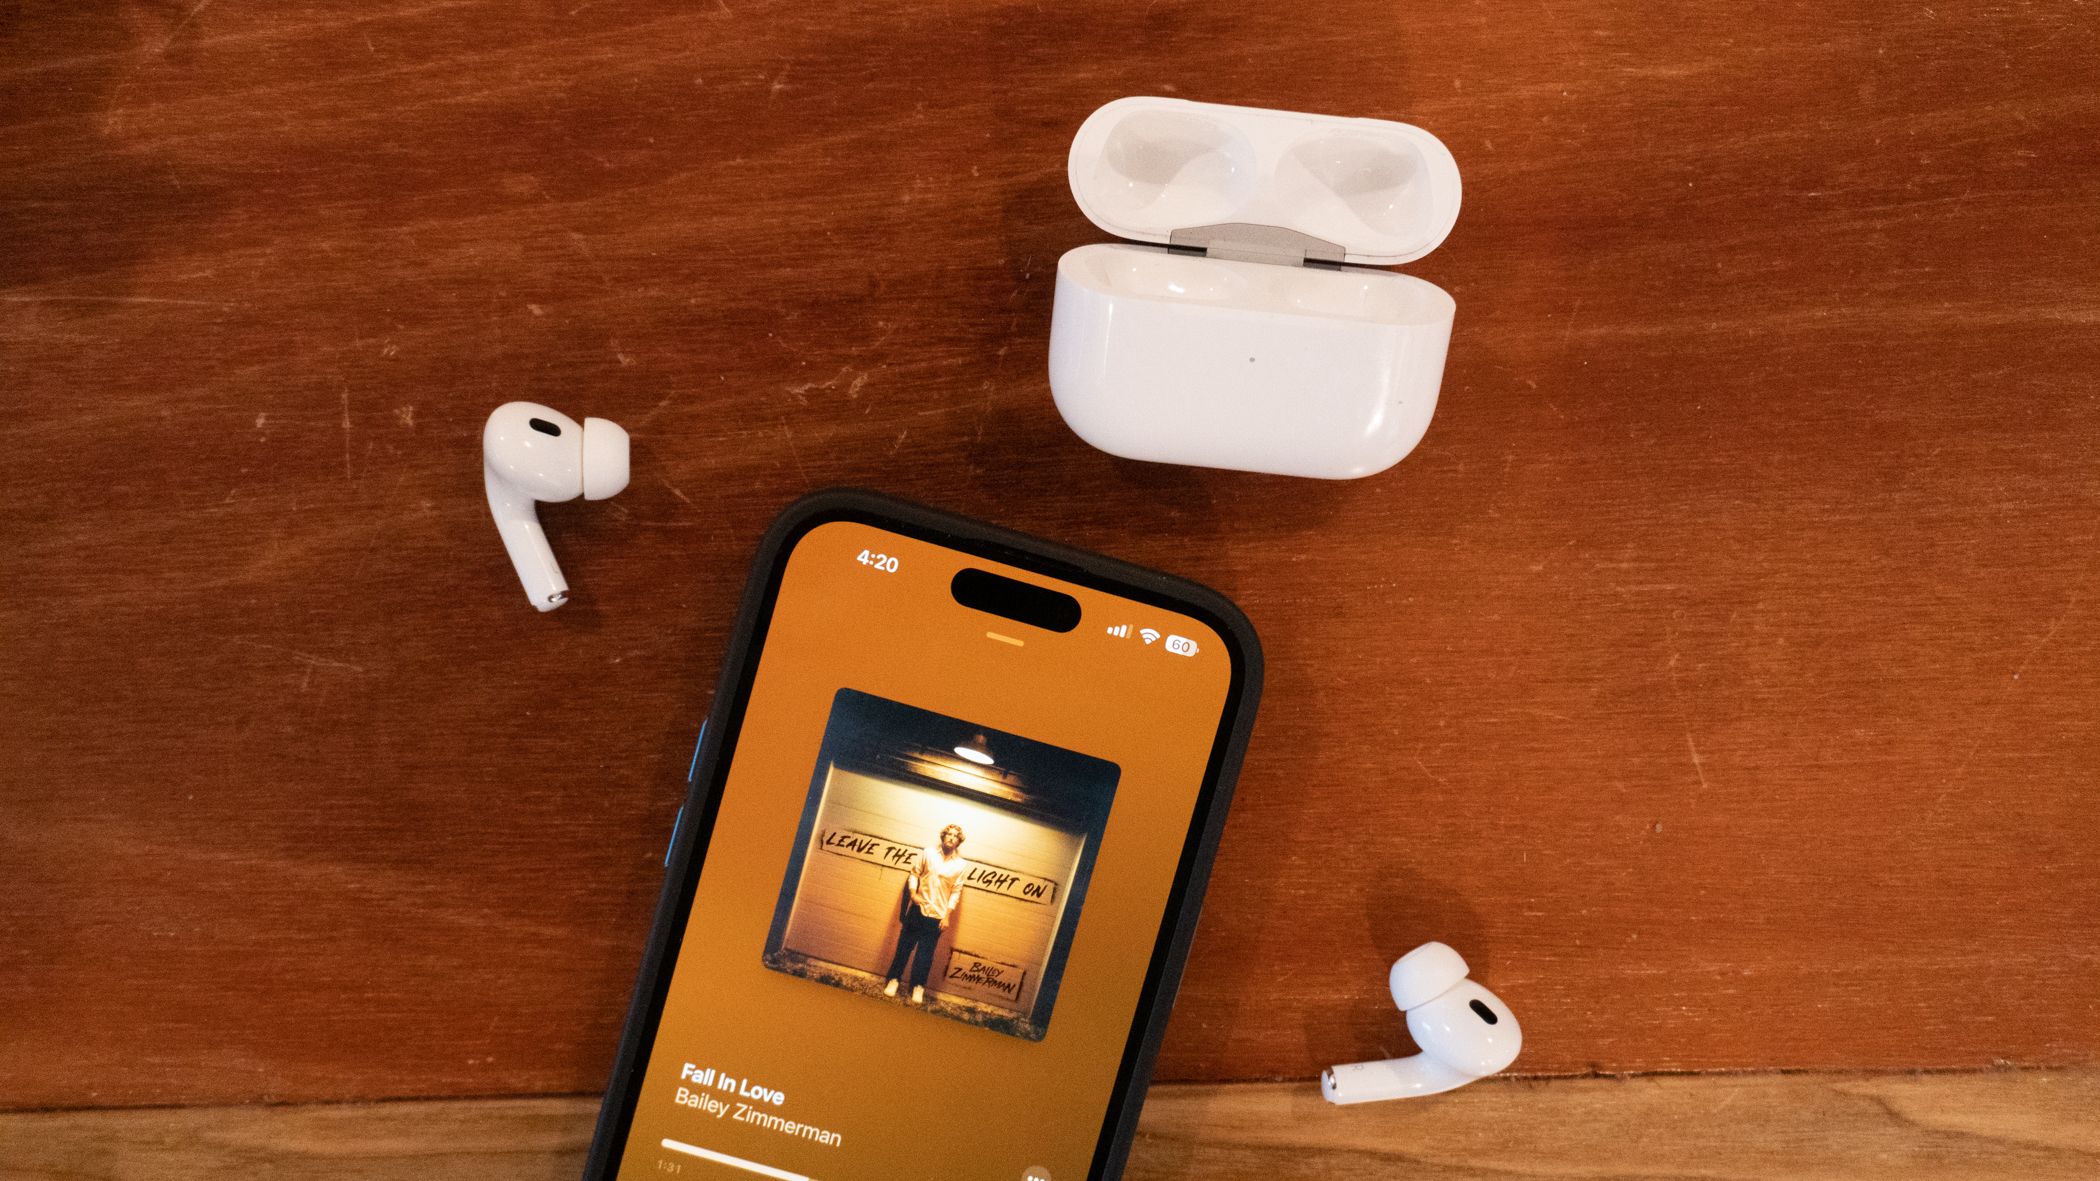 Samsung's Galaxy Buds vs. Apple's AirPods on an iPhone